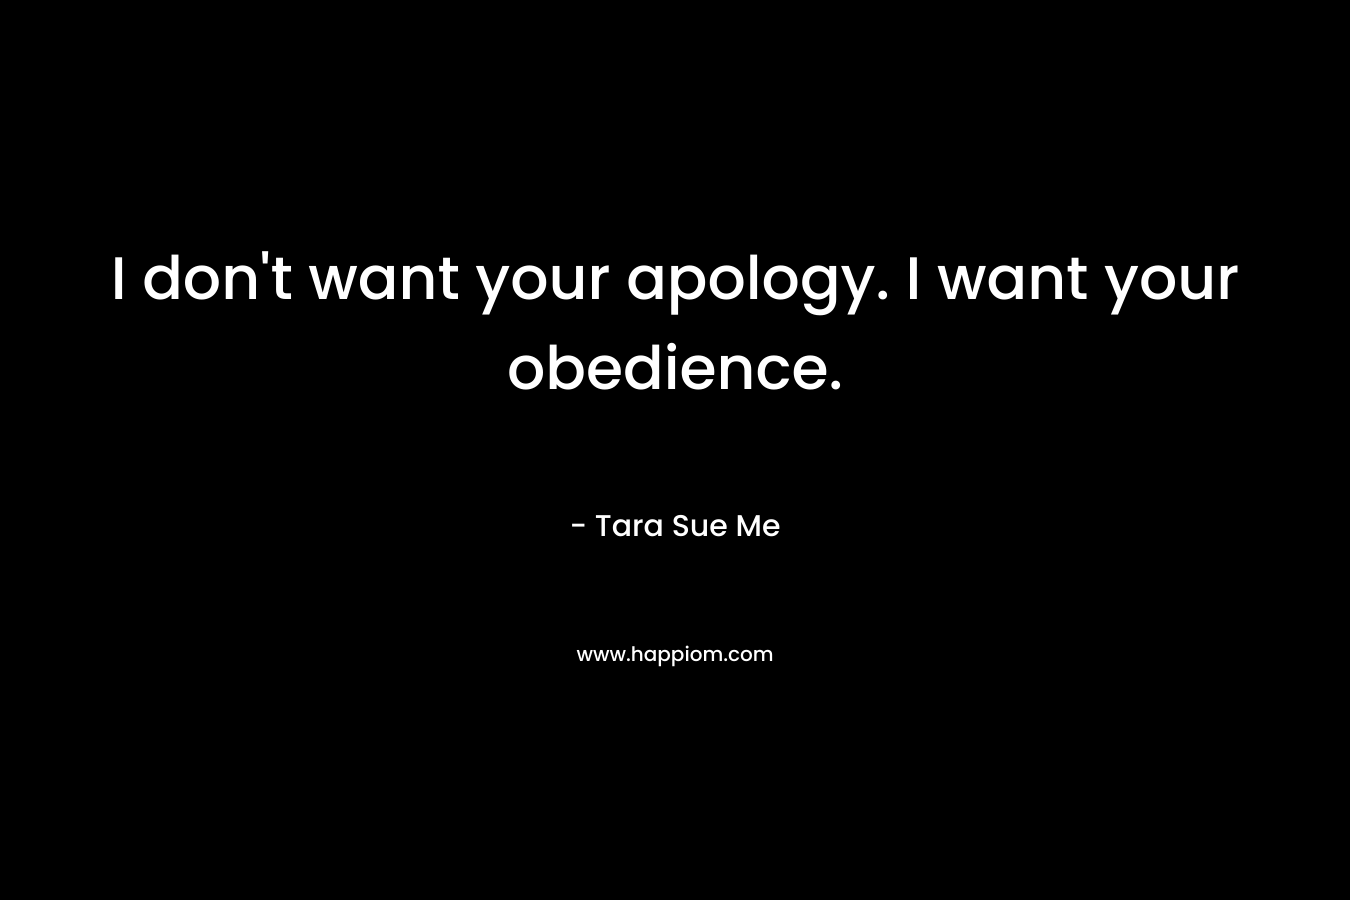 I don't want your apology. I want your obedience.